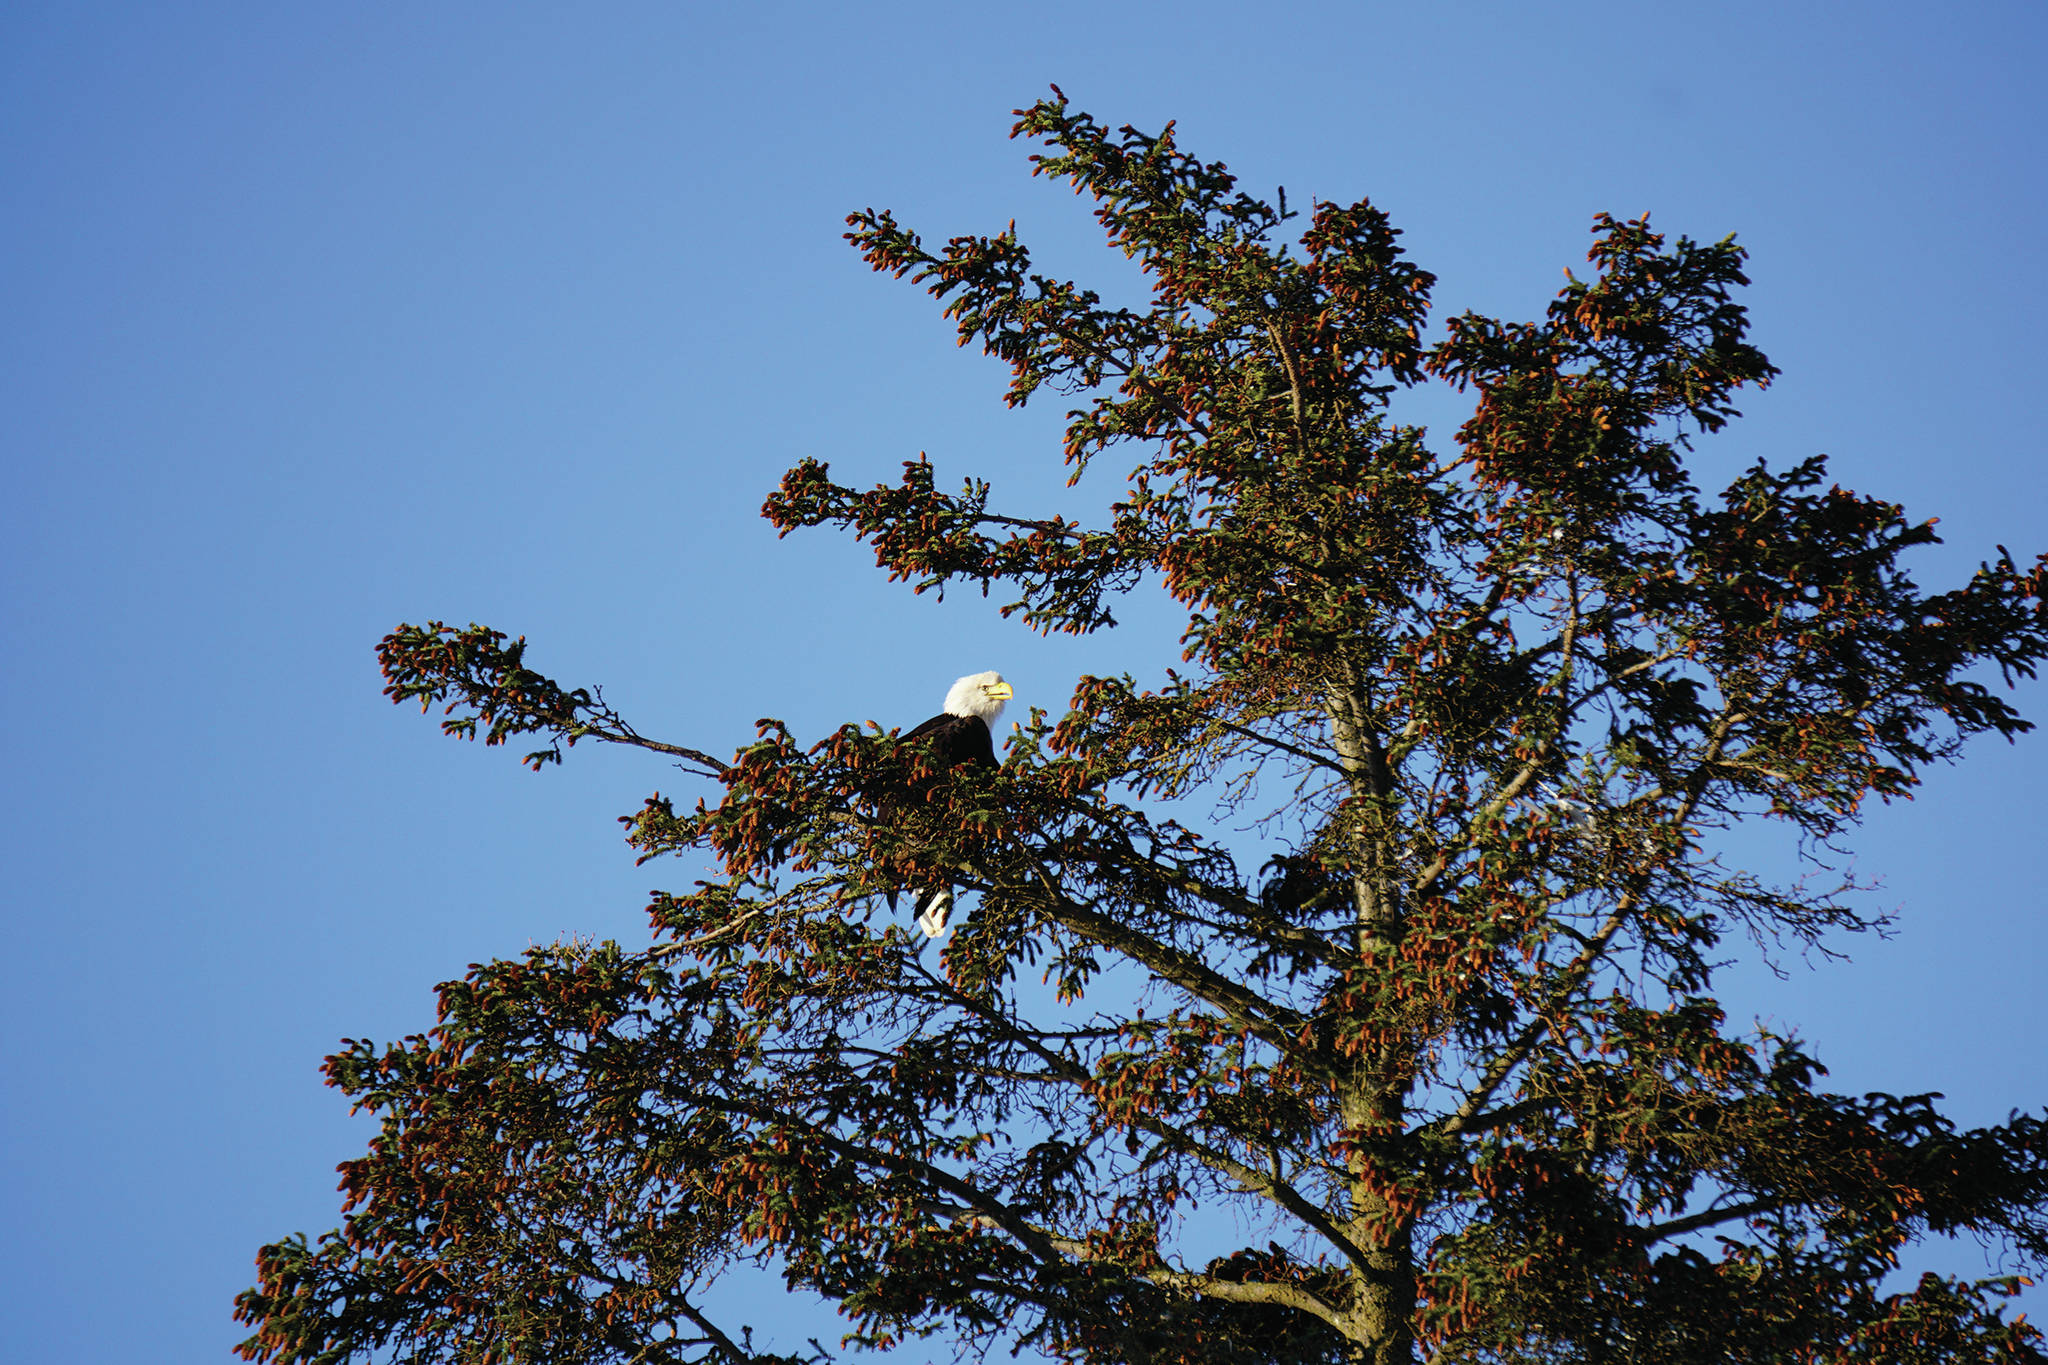 A bald eagle sits in a tree near a nest by the Lake Street stoplight on March 16, 2020 in Homer, Alaska. Another eagle sat near the nest in another tree. Since 2010, a pair of bald eagles has nested in the area near Beluga Slough south of the Lake Street and Sterling Highway intersection, building or rebuilding nests over the years. They have been using this nest since 2016. (Photo by Michael Armstrong/Homer News)